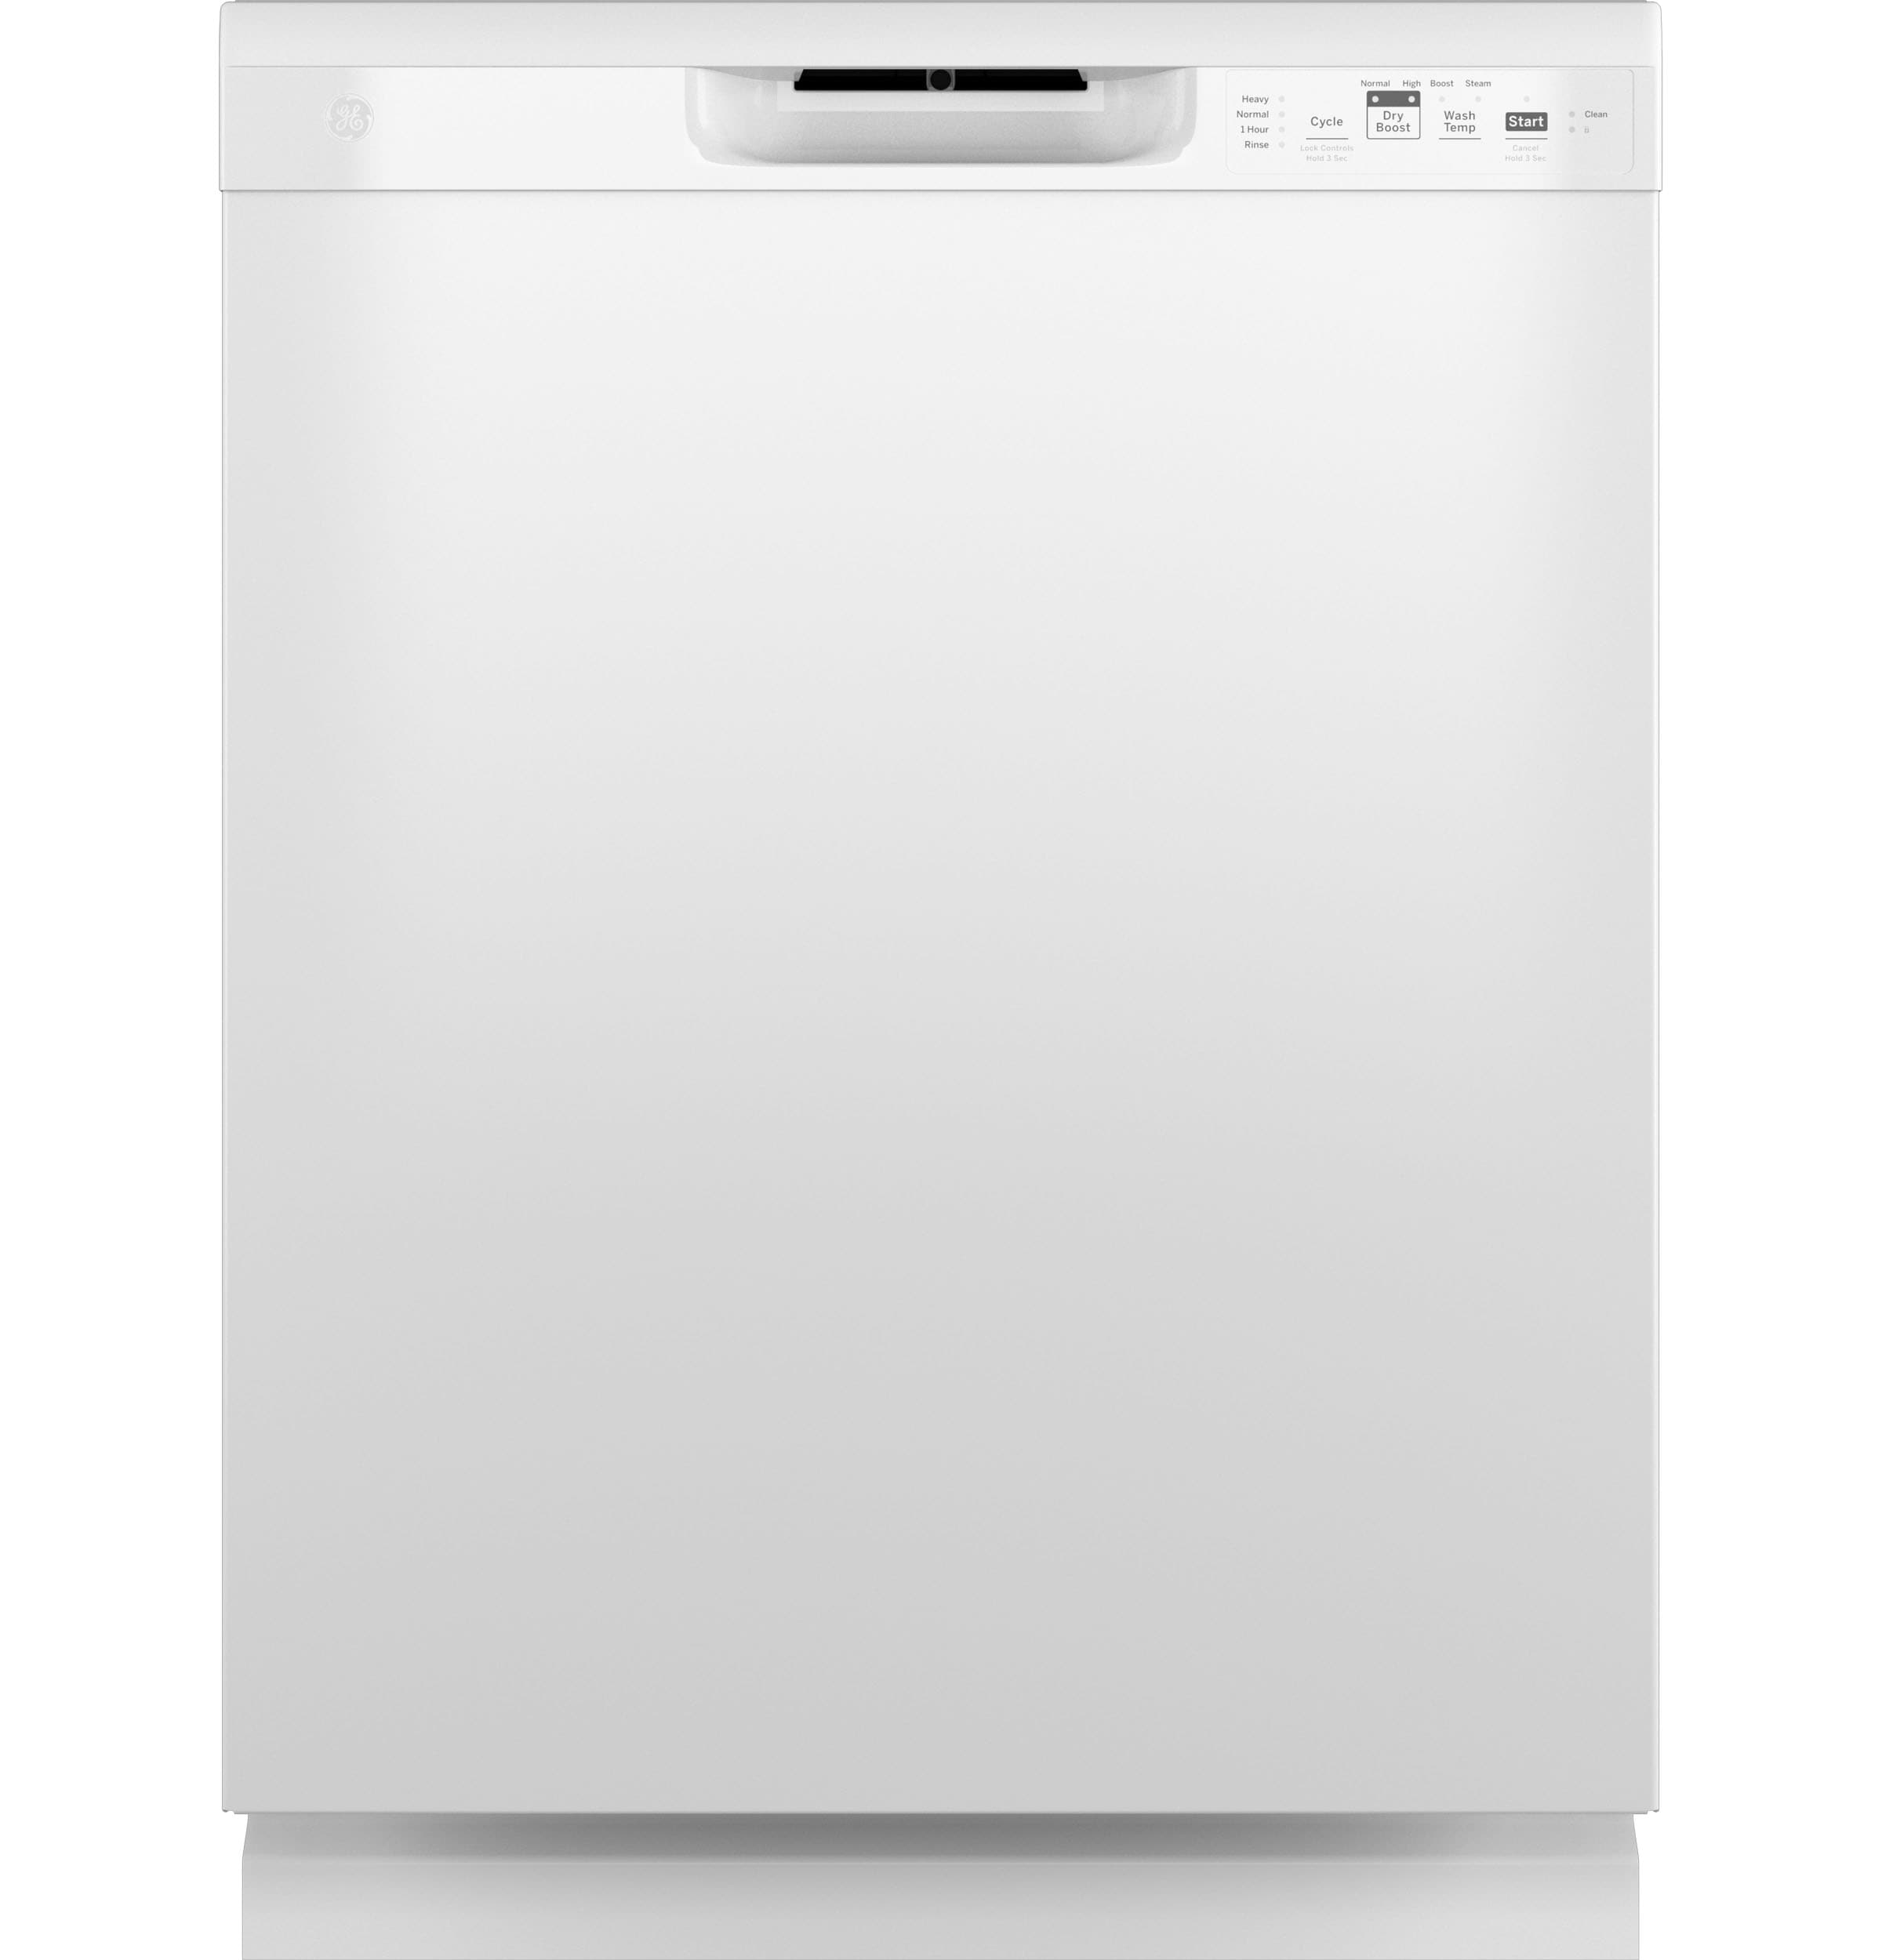 GE Dry Boost Front Control 24-in Built-In Dishwasher (White) ENERGY STAR,  54-dBA in the Built-In Dishwashers department at